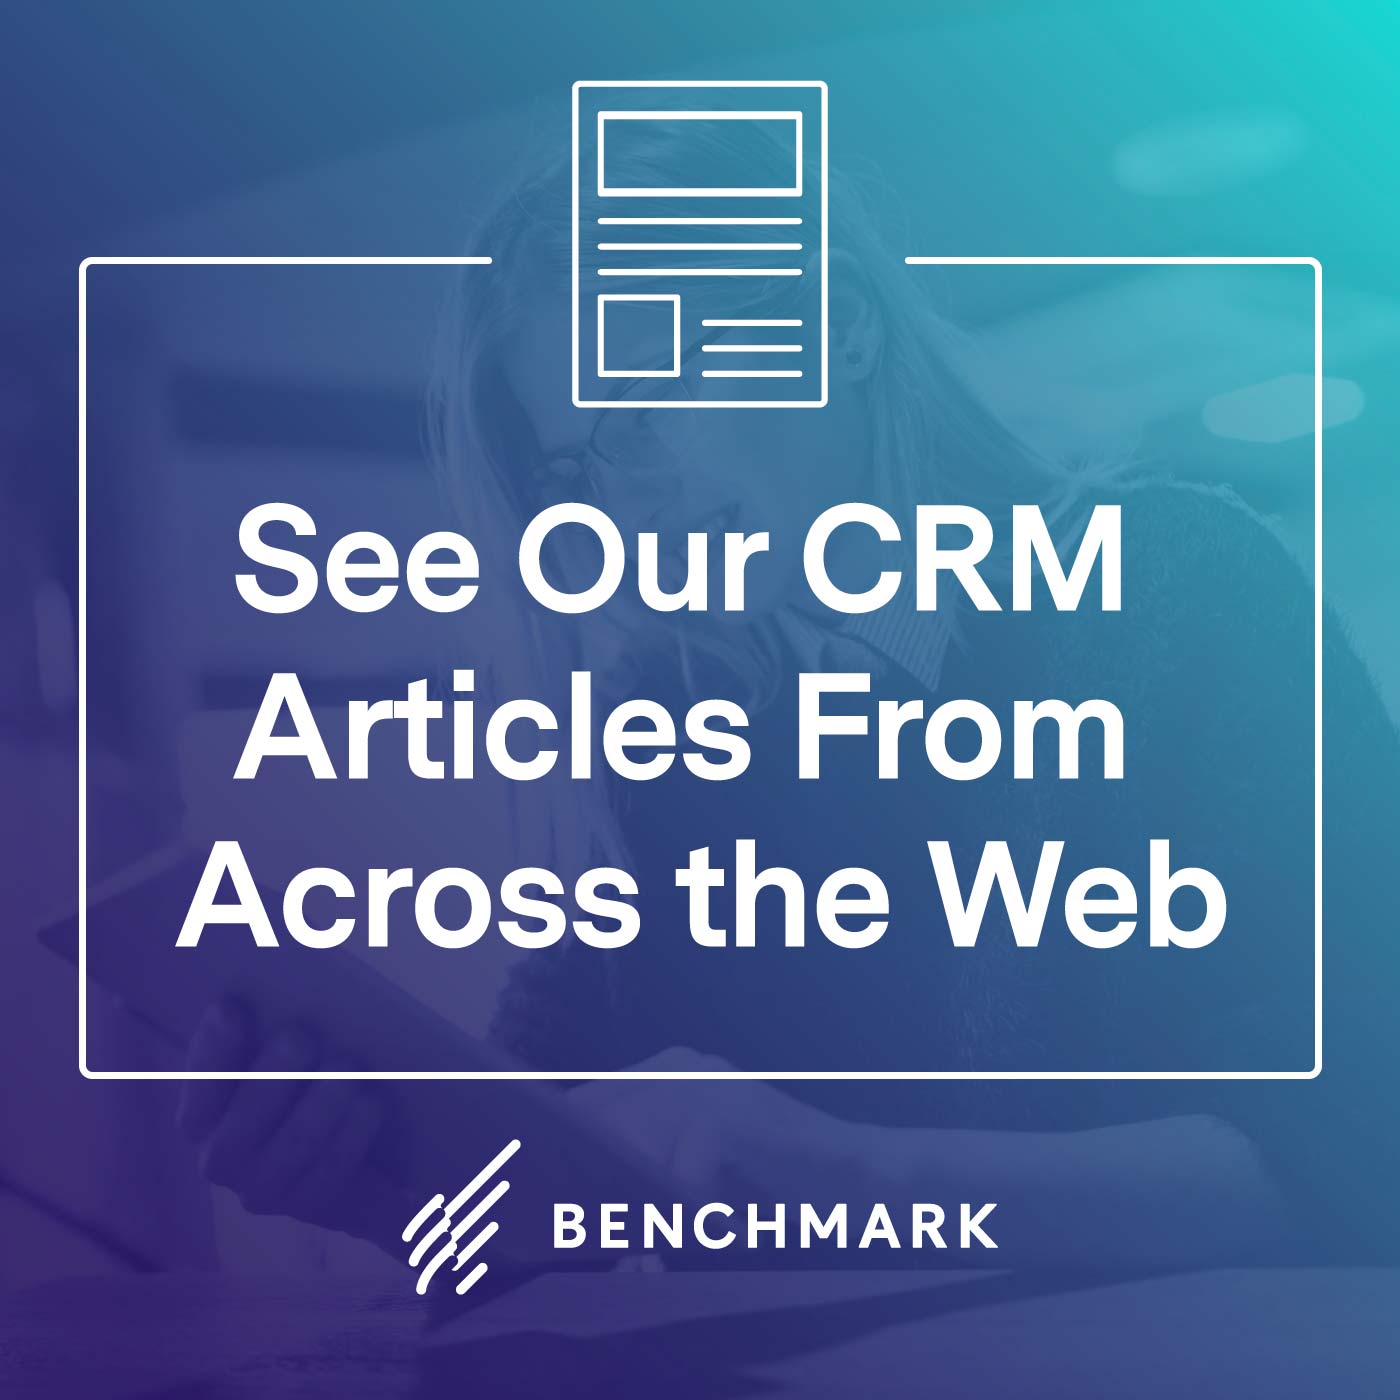 See Our CRM Articles From Across the Web